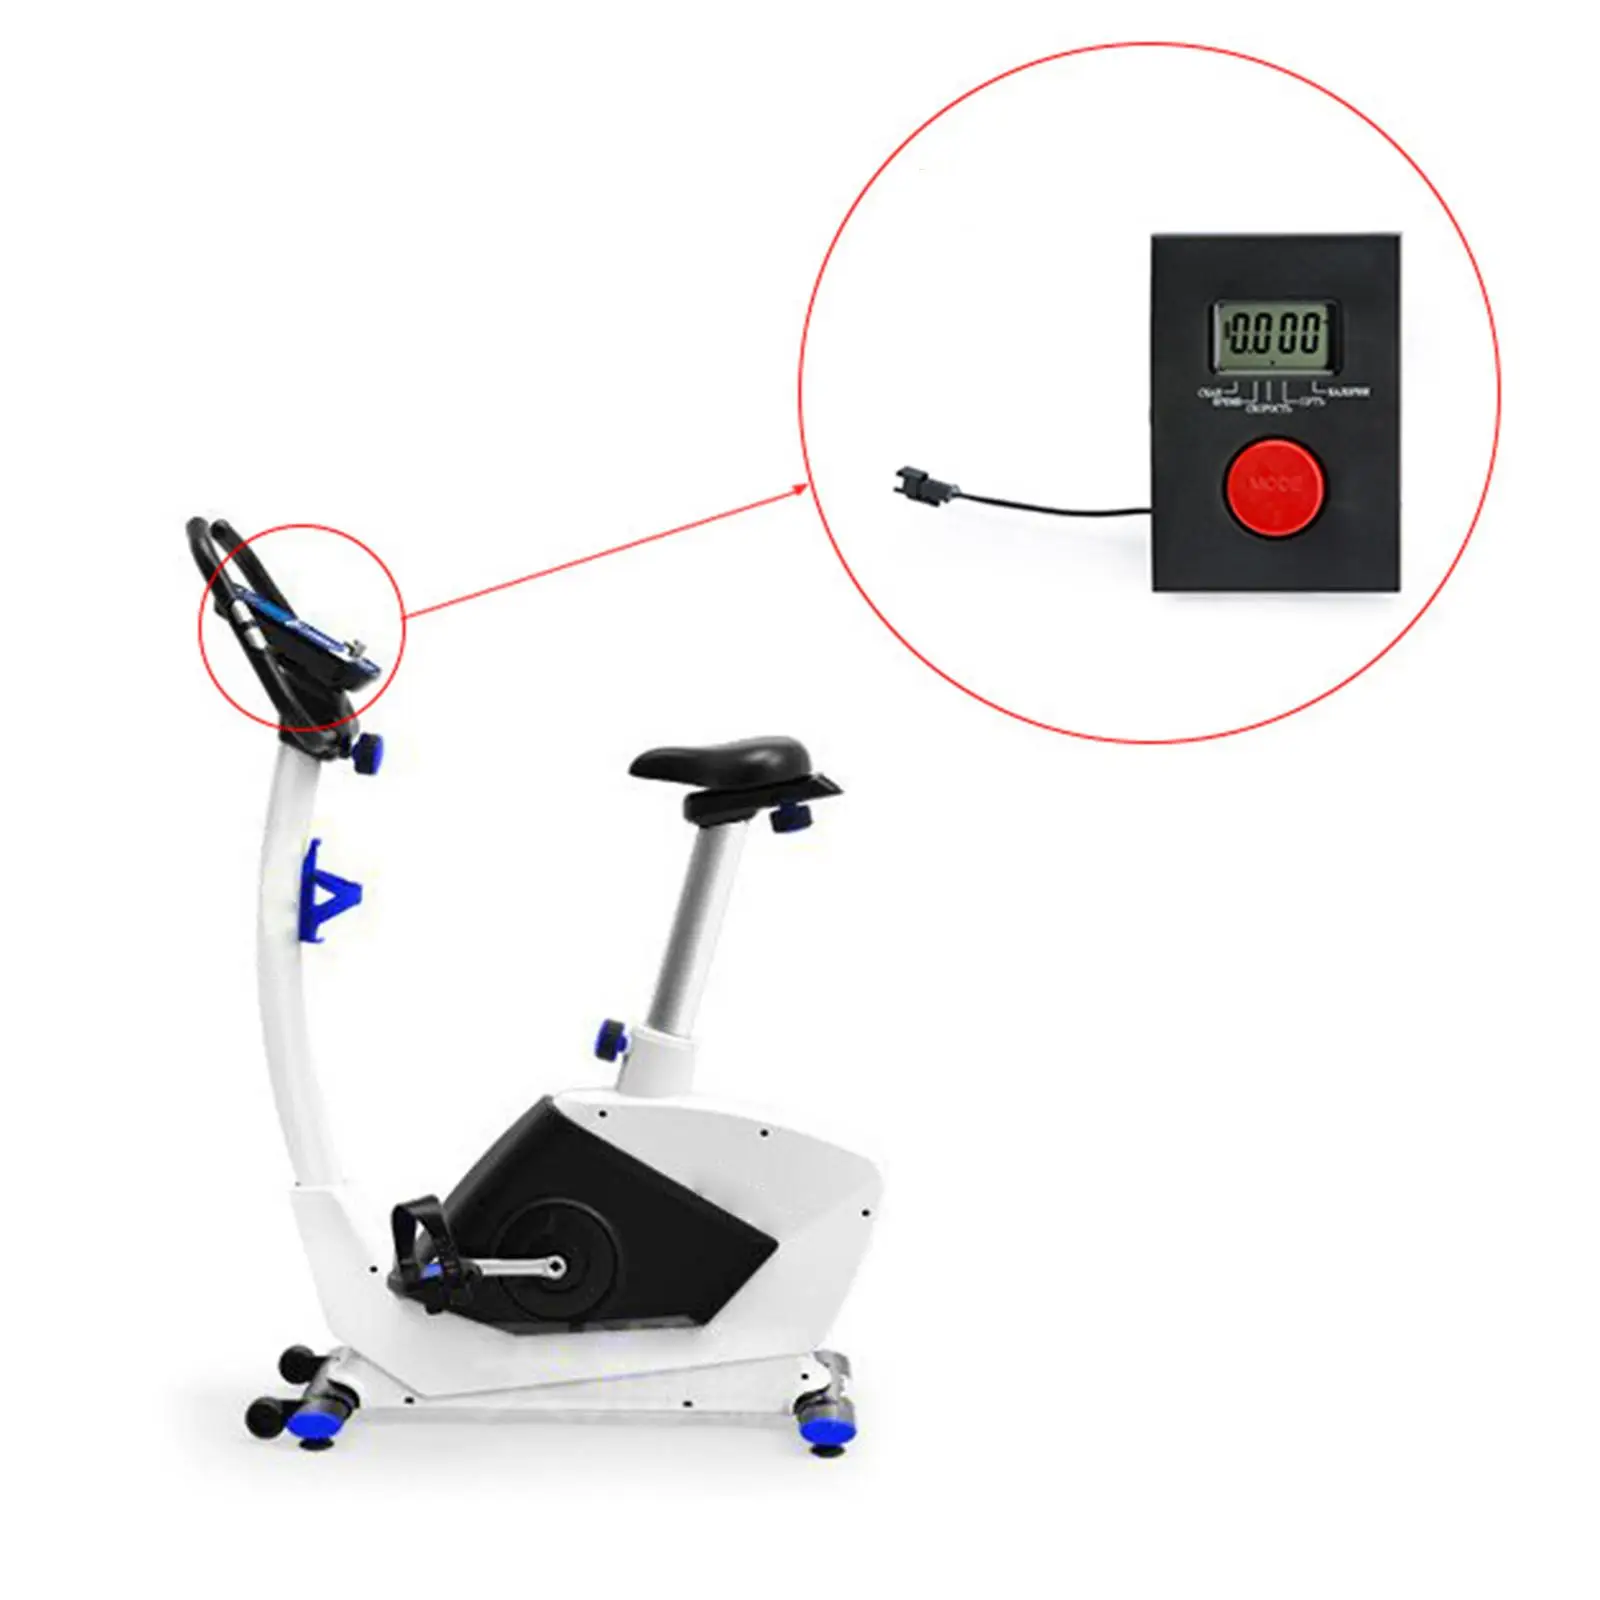 Multifunction Monitor speedometers for Stationary Bikes Measurement Sturdy for